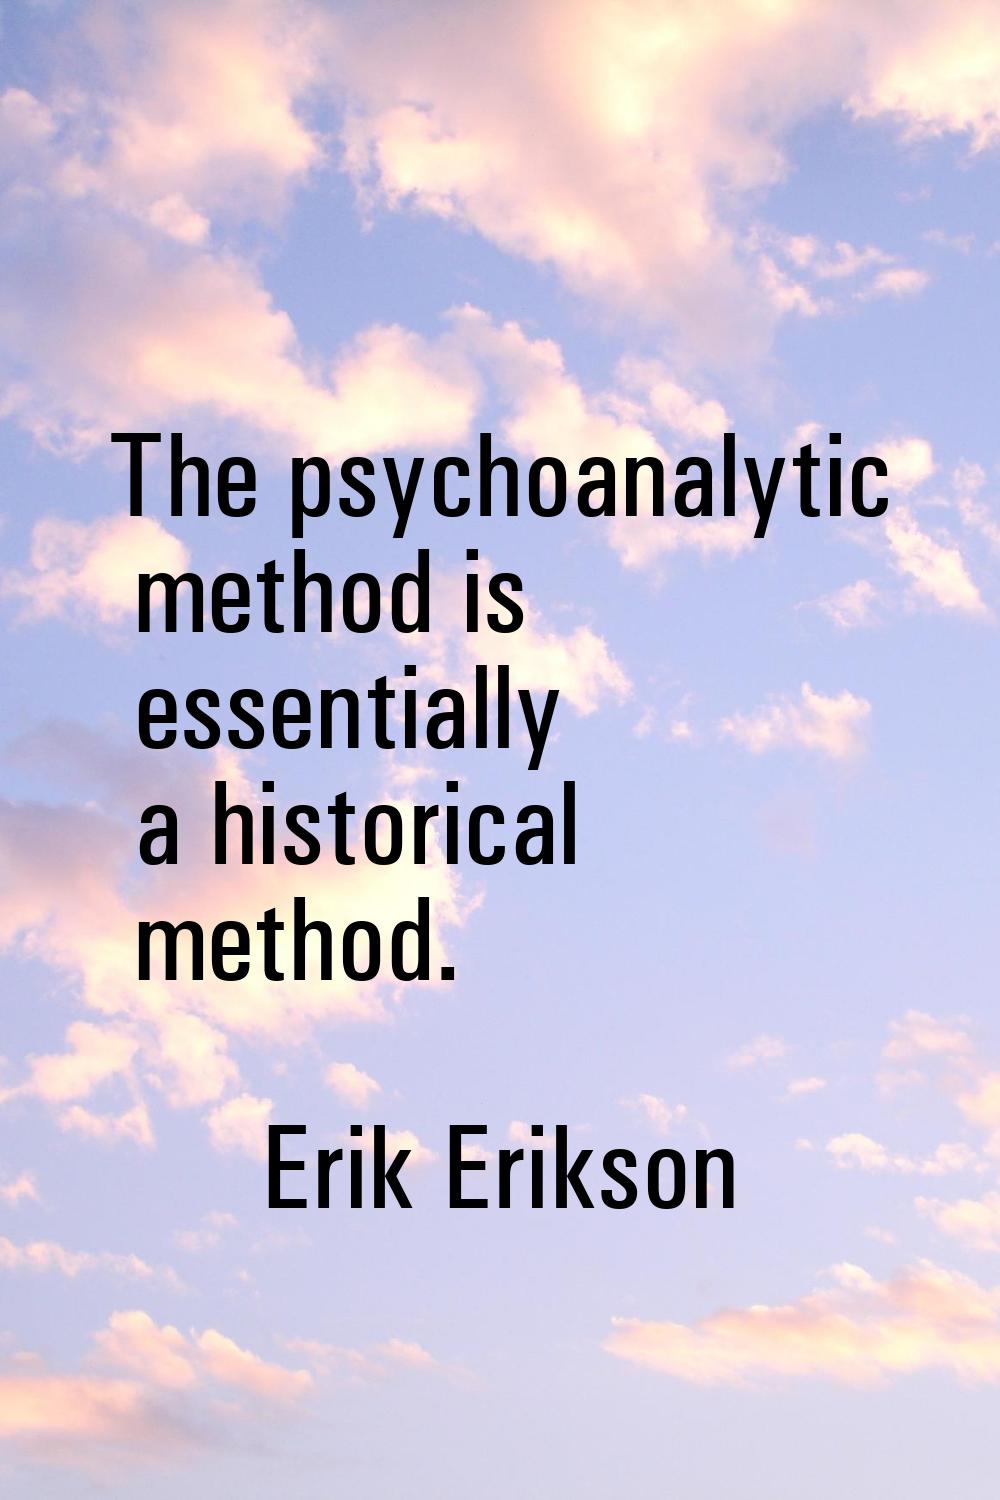 The psychoanalytic method is essentially a historical method.